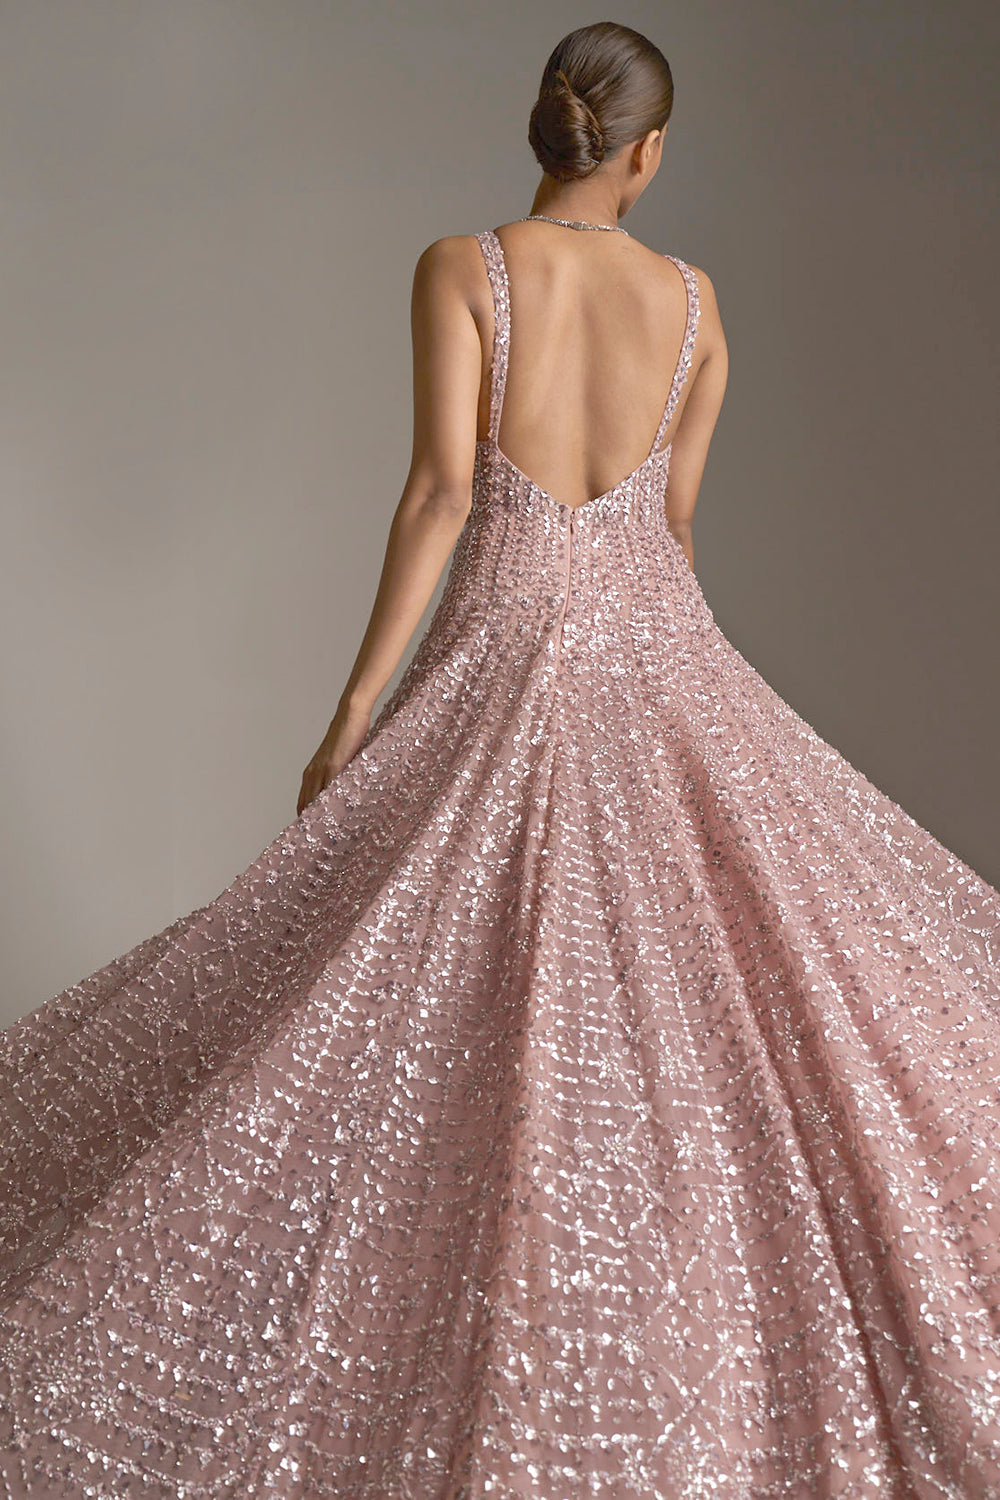 Rose Pink Sequin Gown